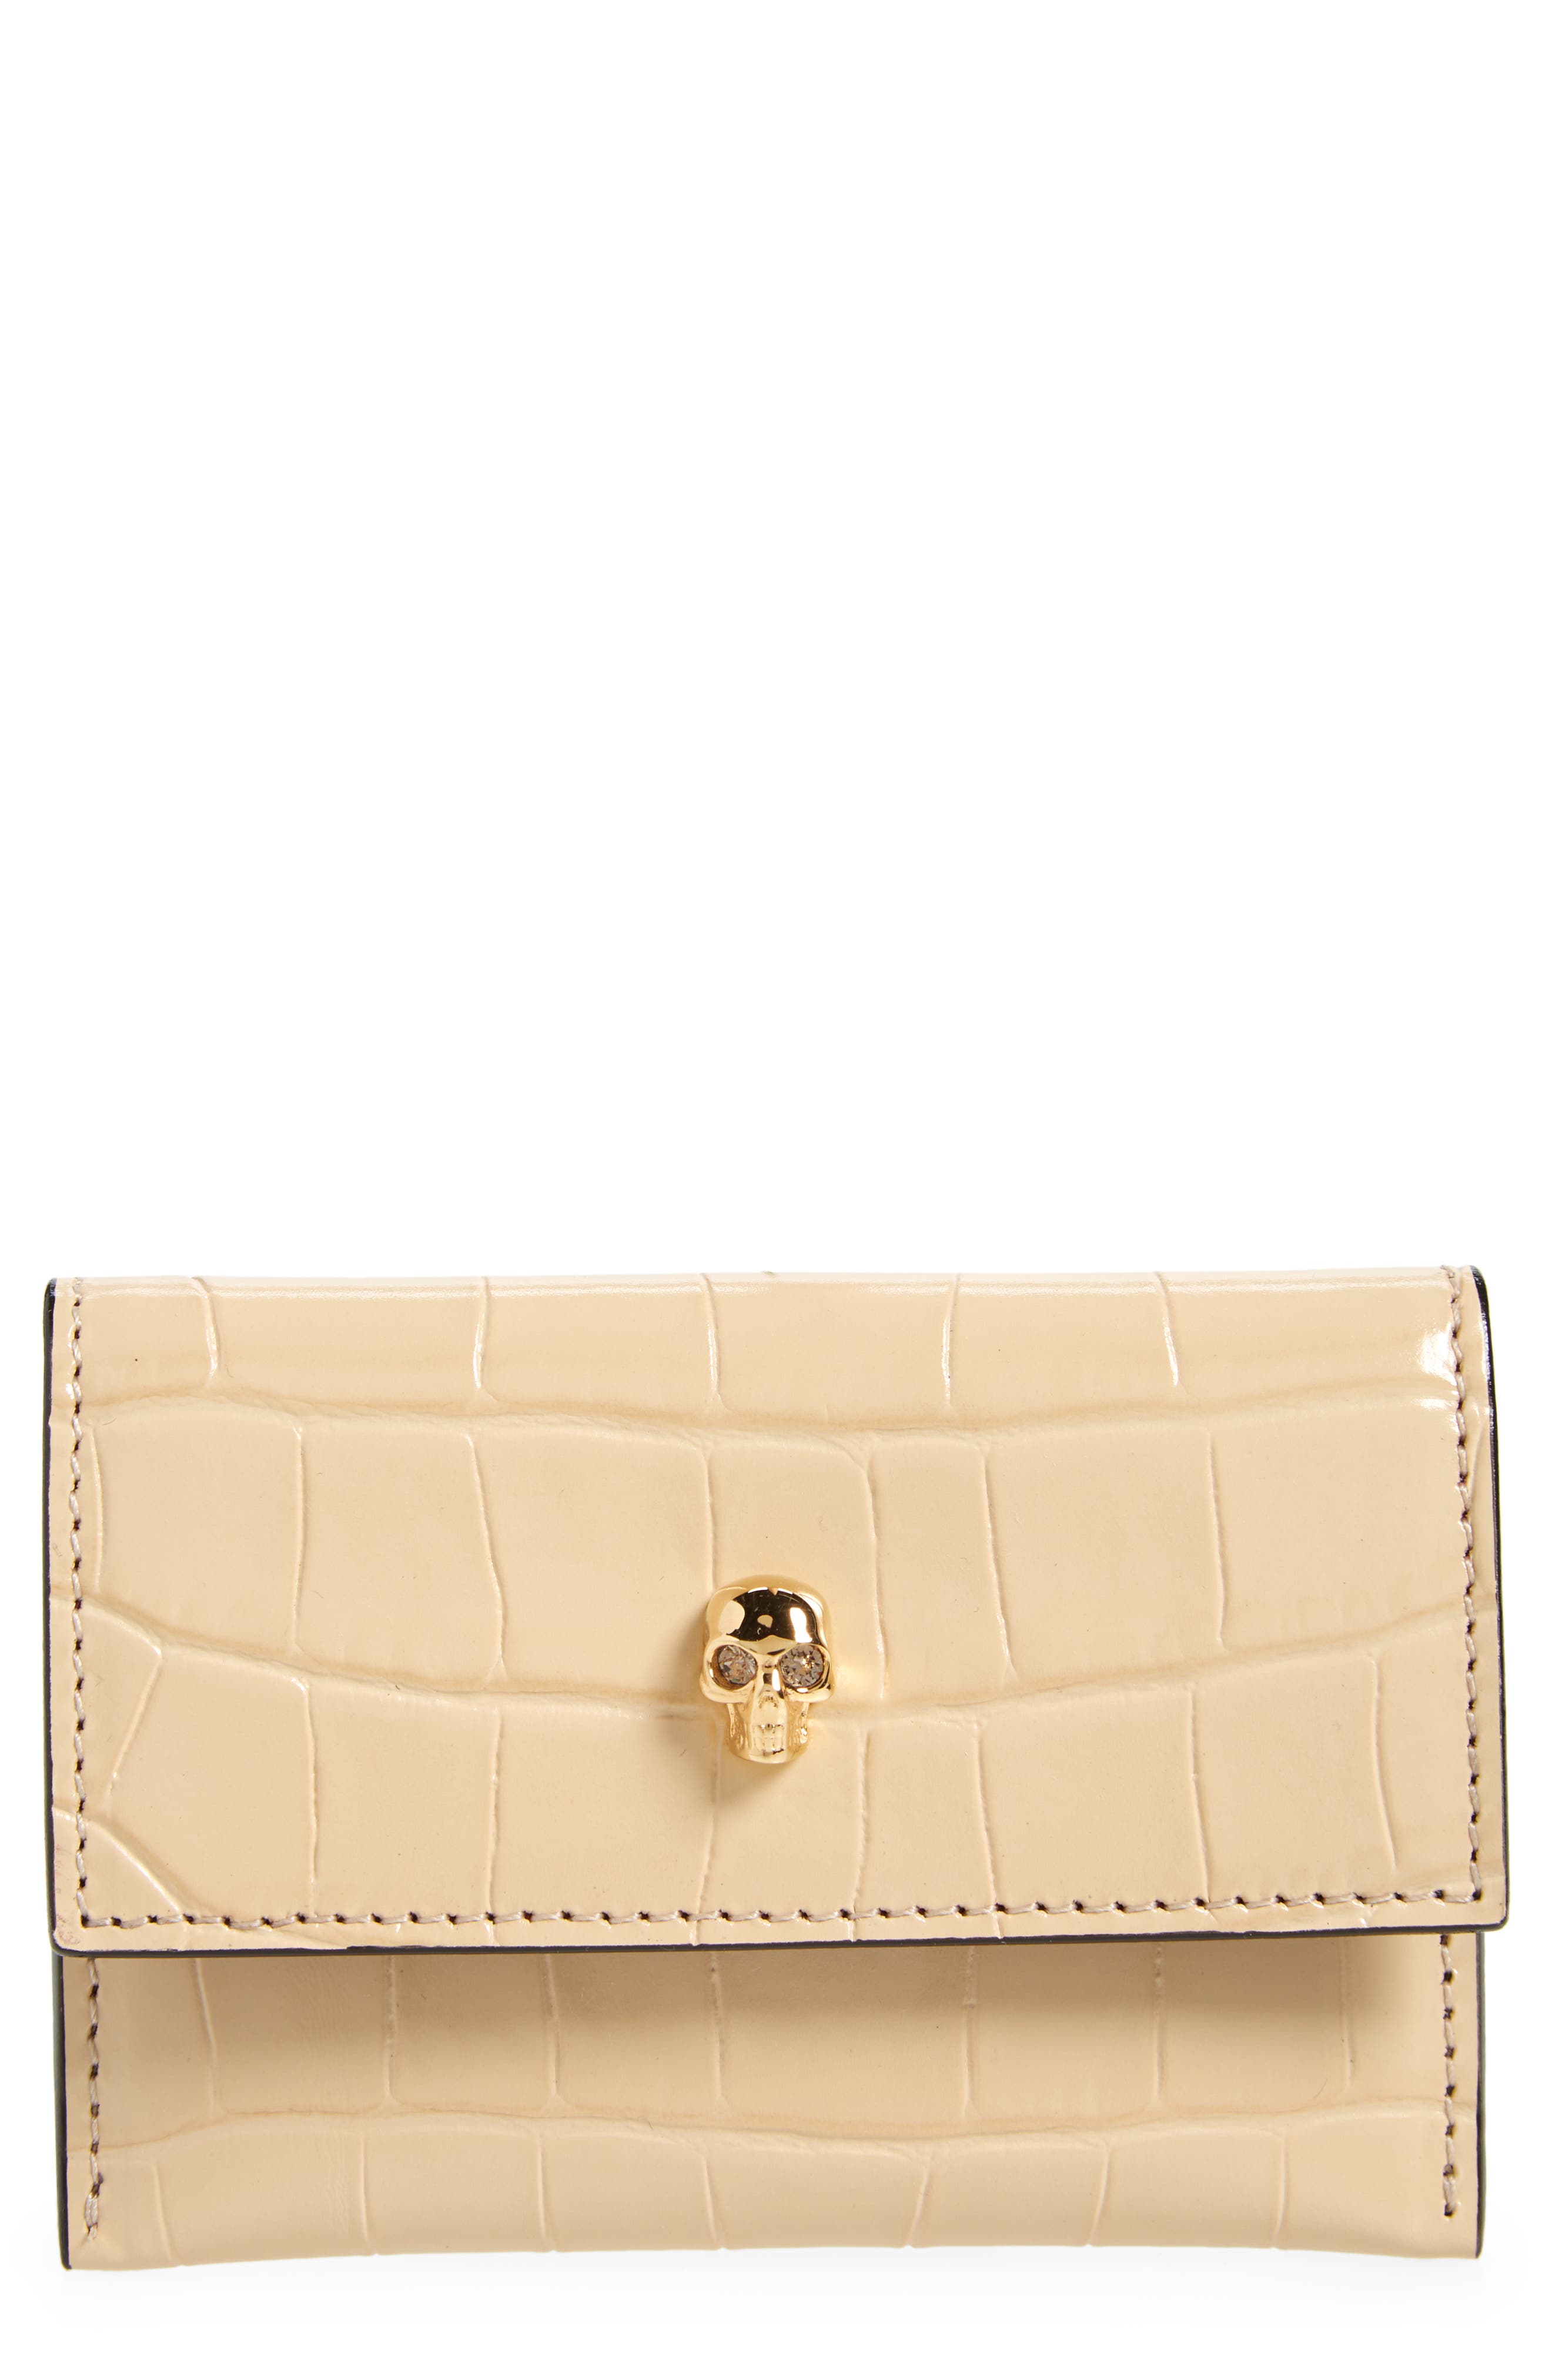 Alexander McQueen Croc Embossed Leather Card Case in Sand at Nordstrom